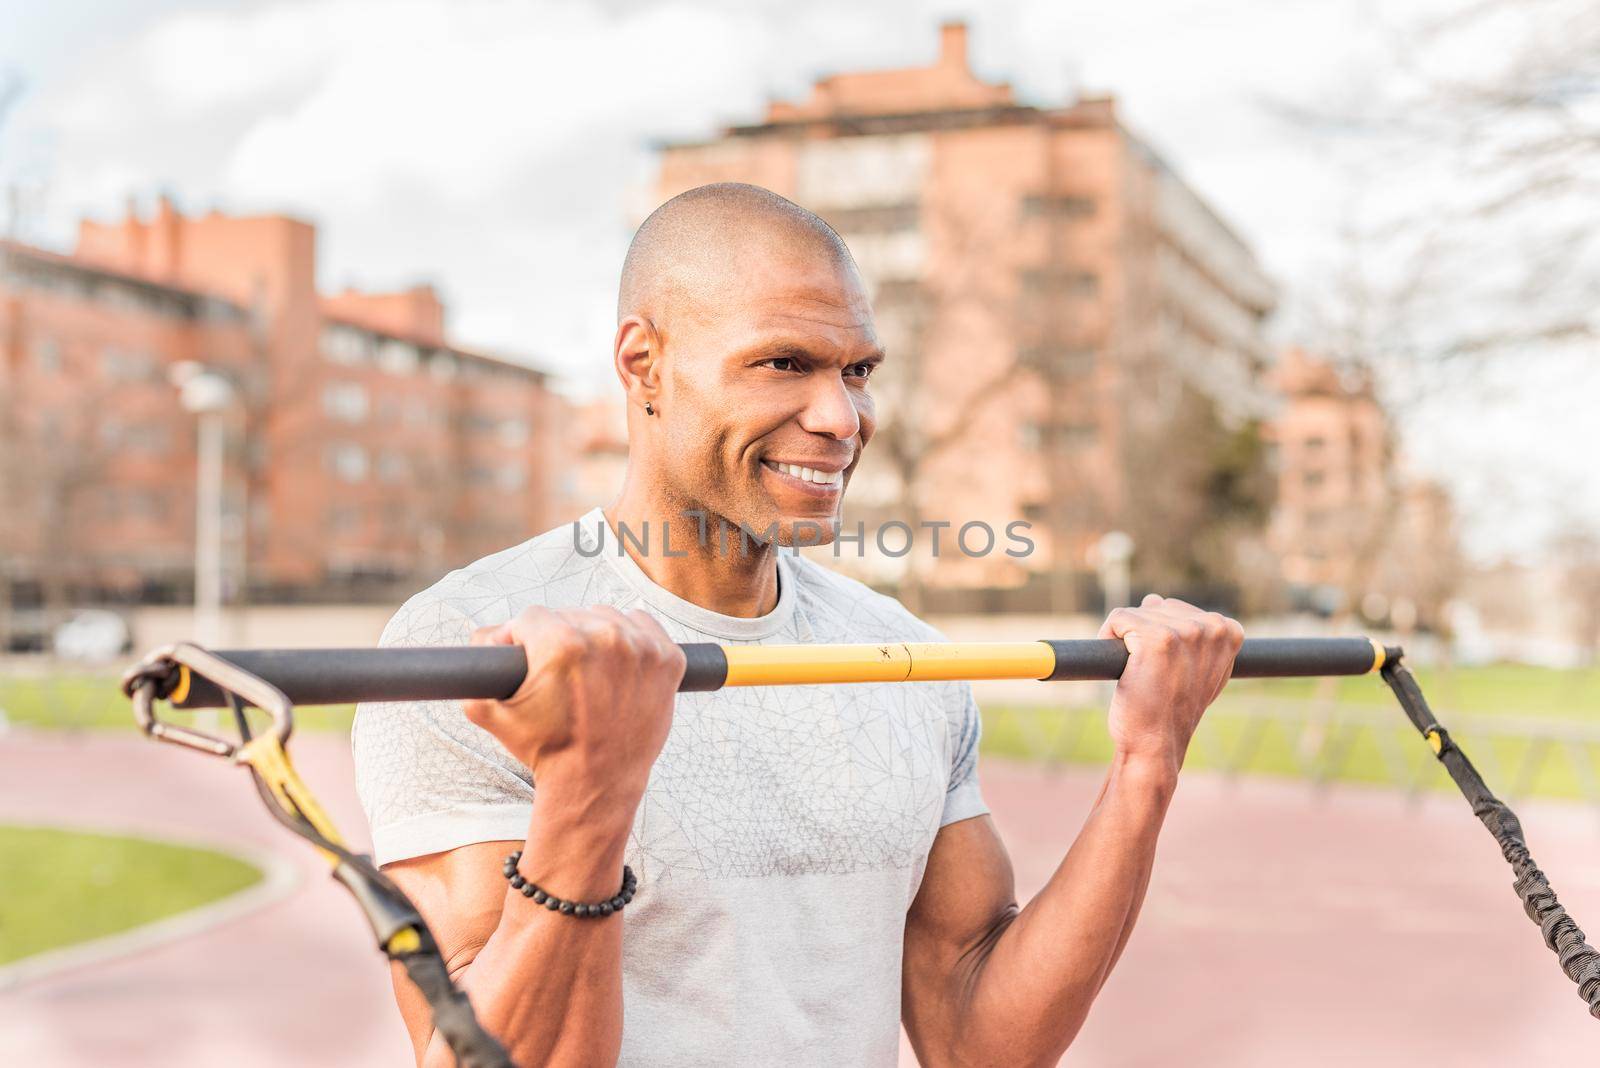 Atlhetic latin sportsman exercising with an elastic gym stick in the park. Hispanic adult man exercising outside.